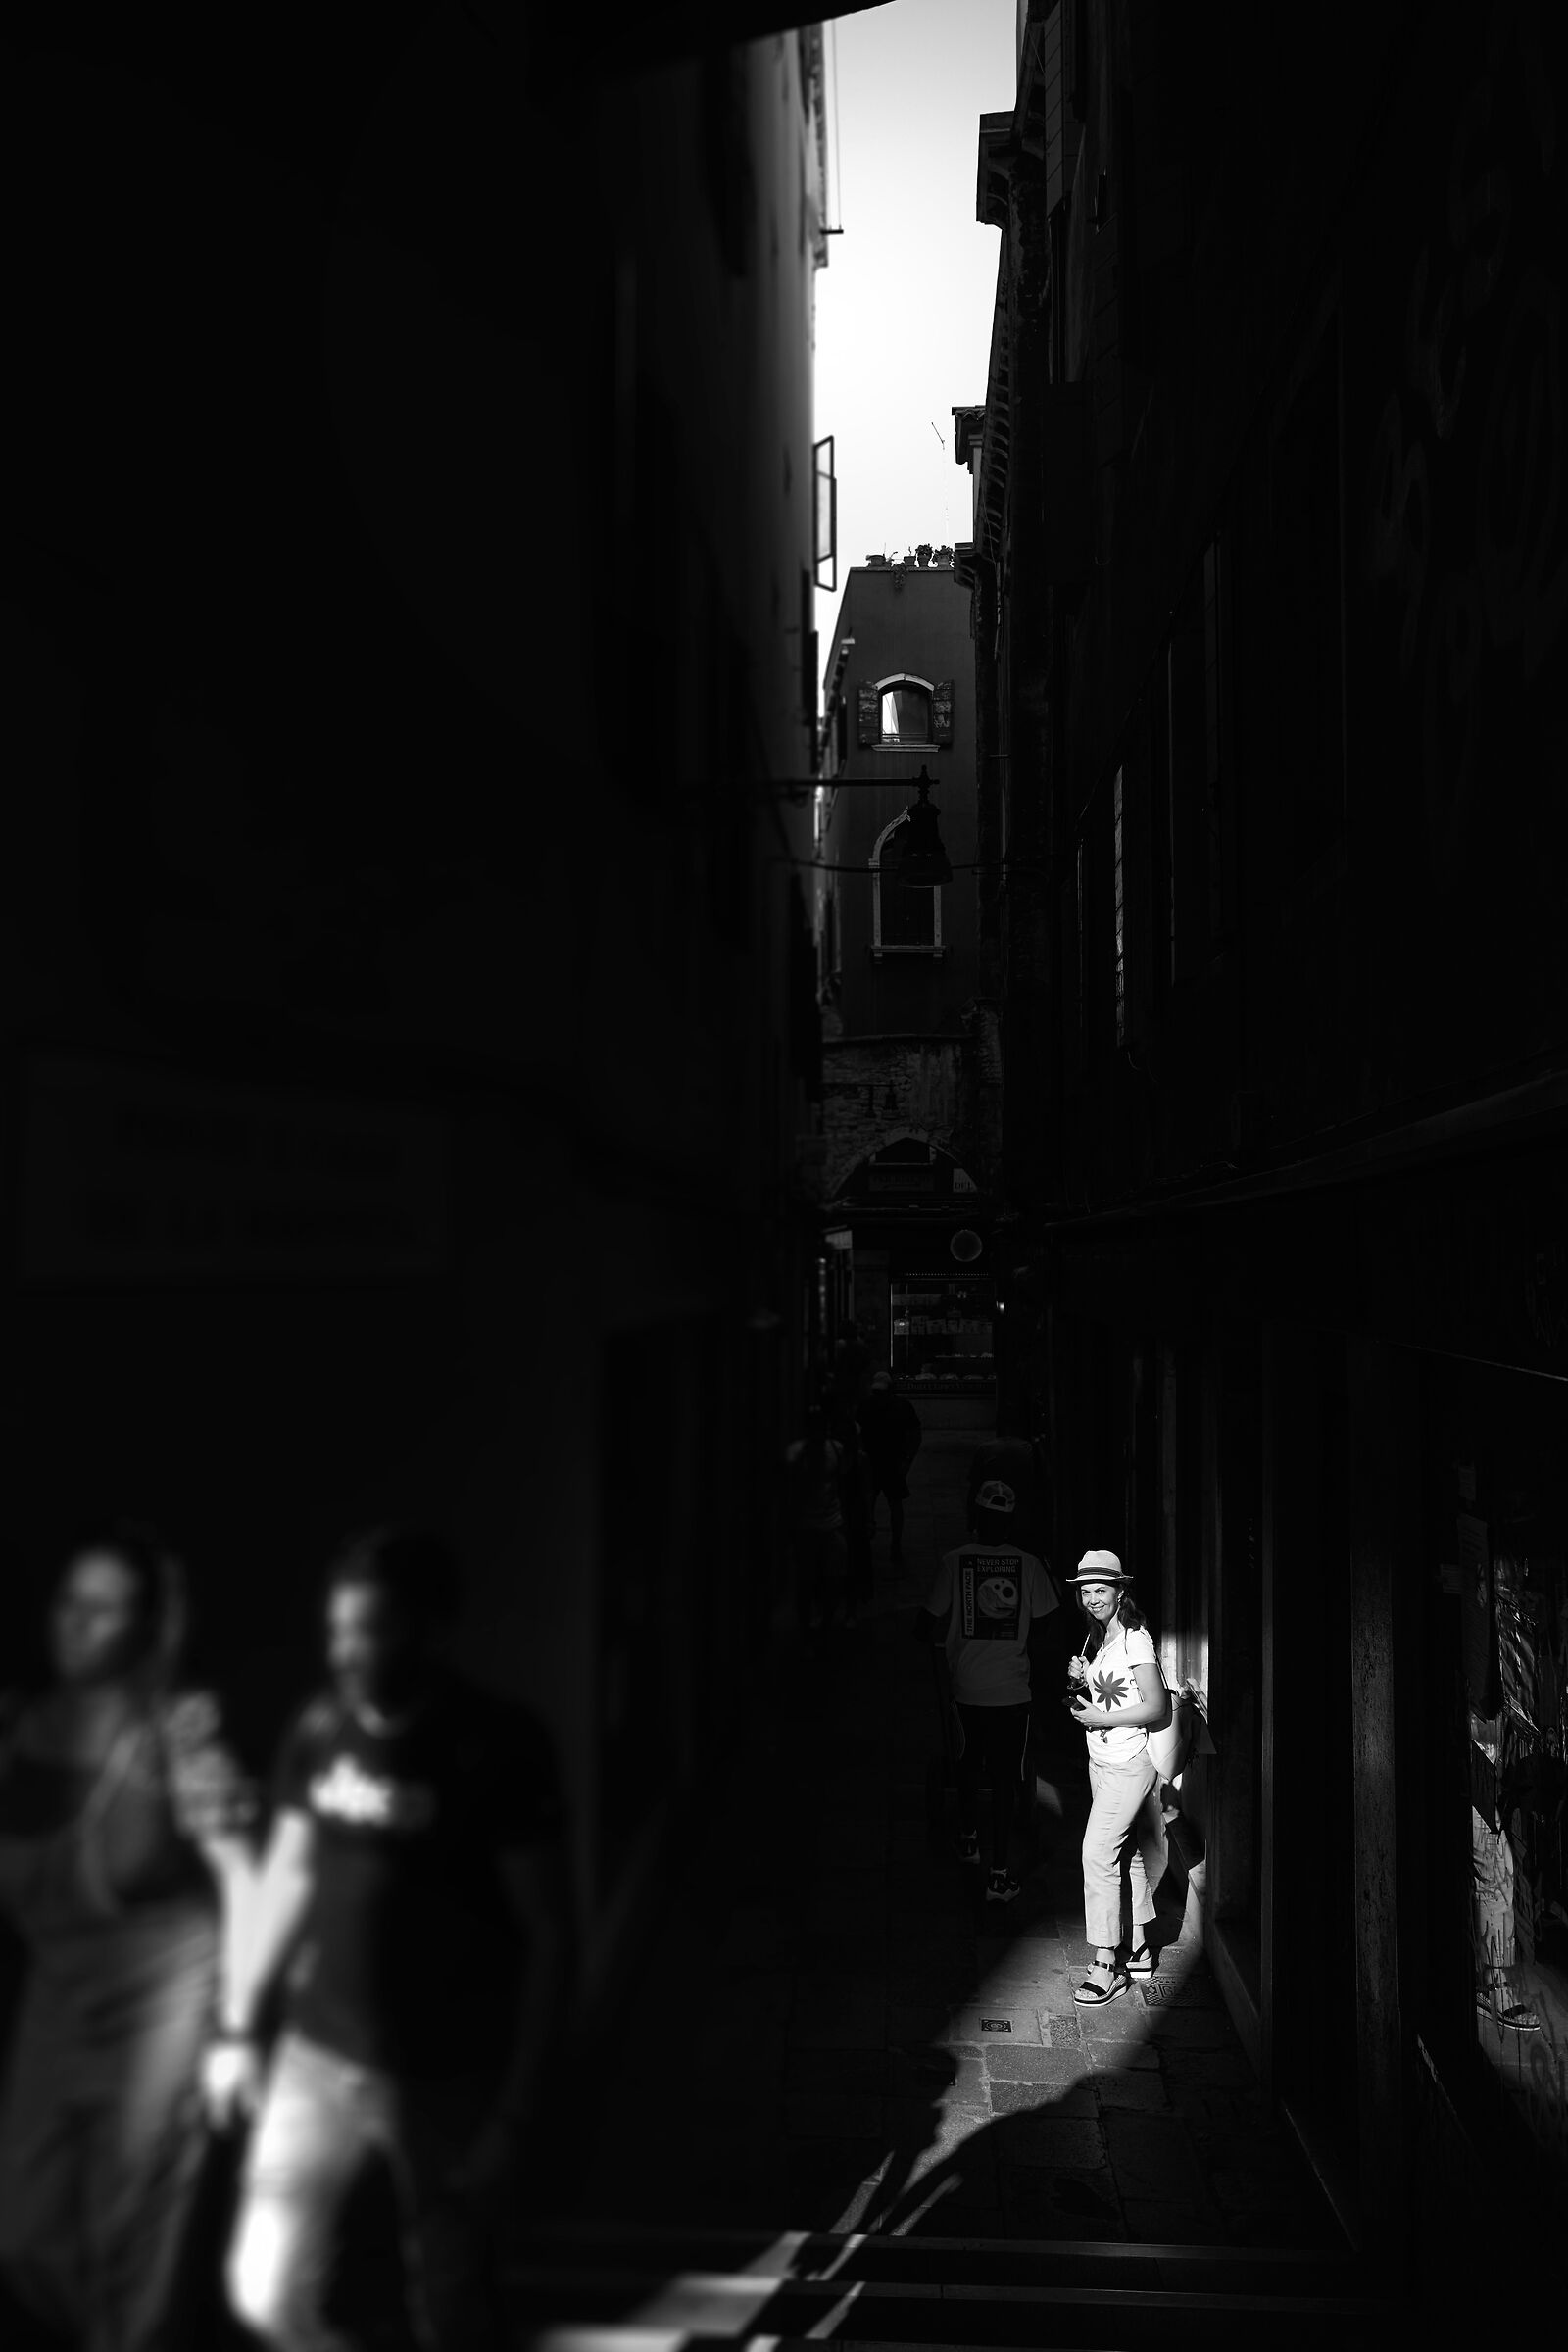 Lights and shadows in Venice...